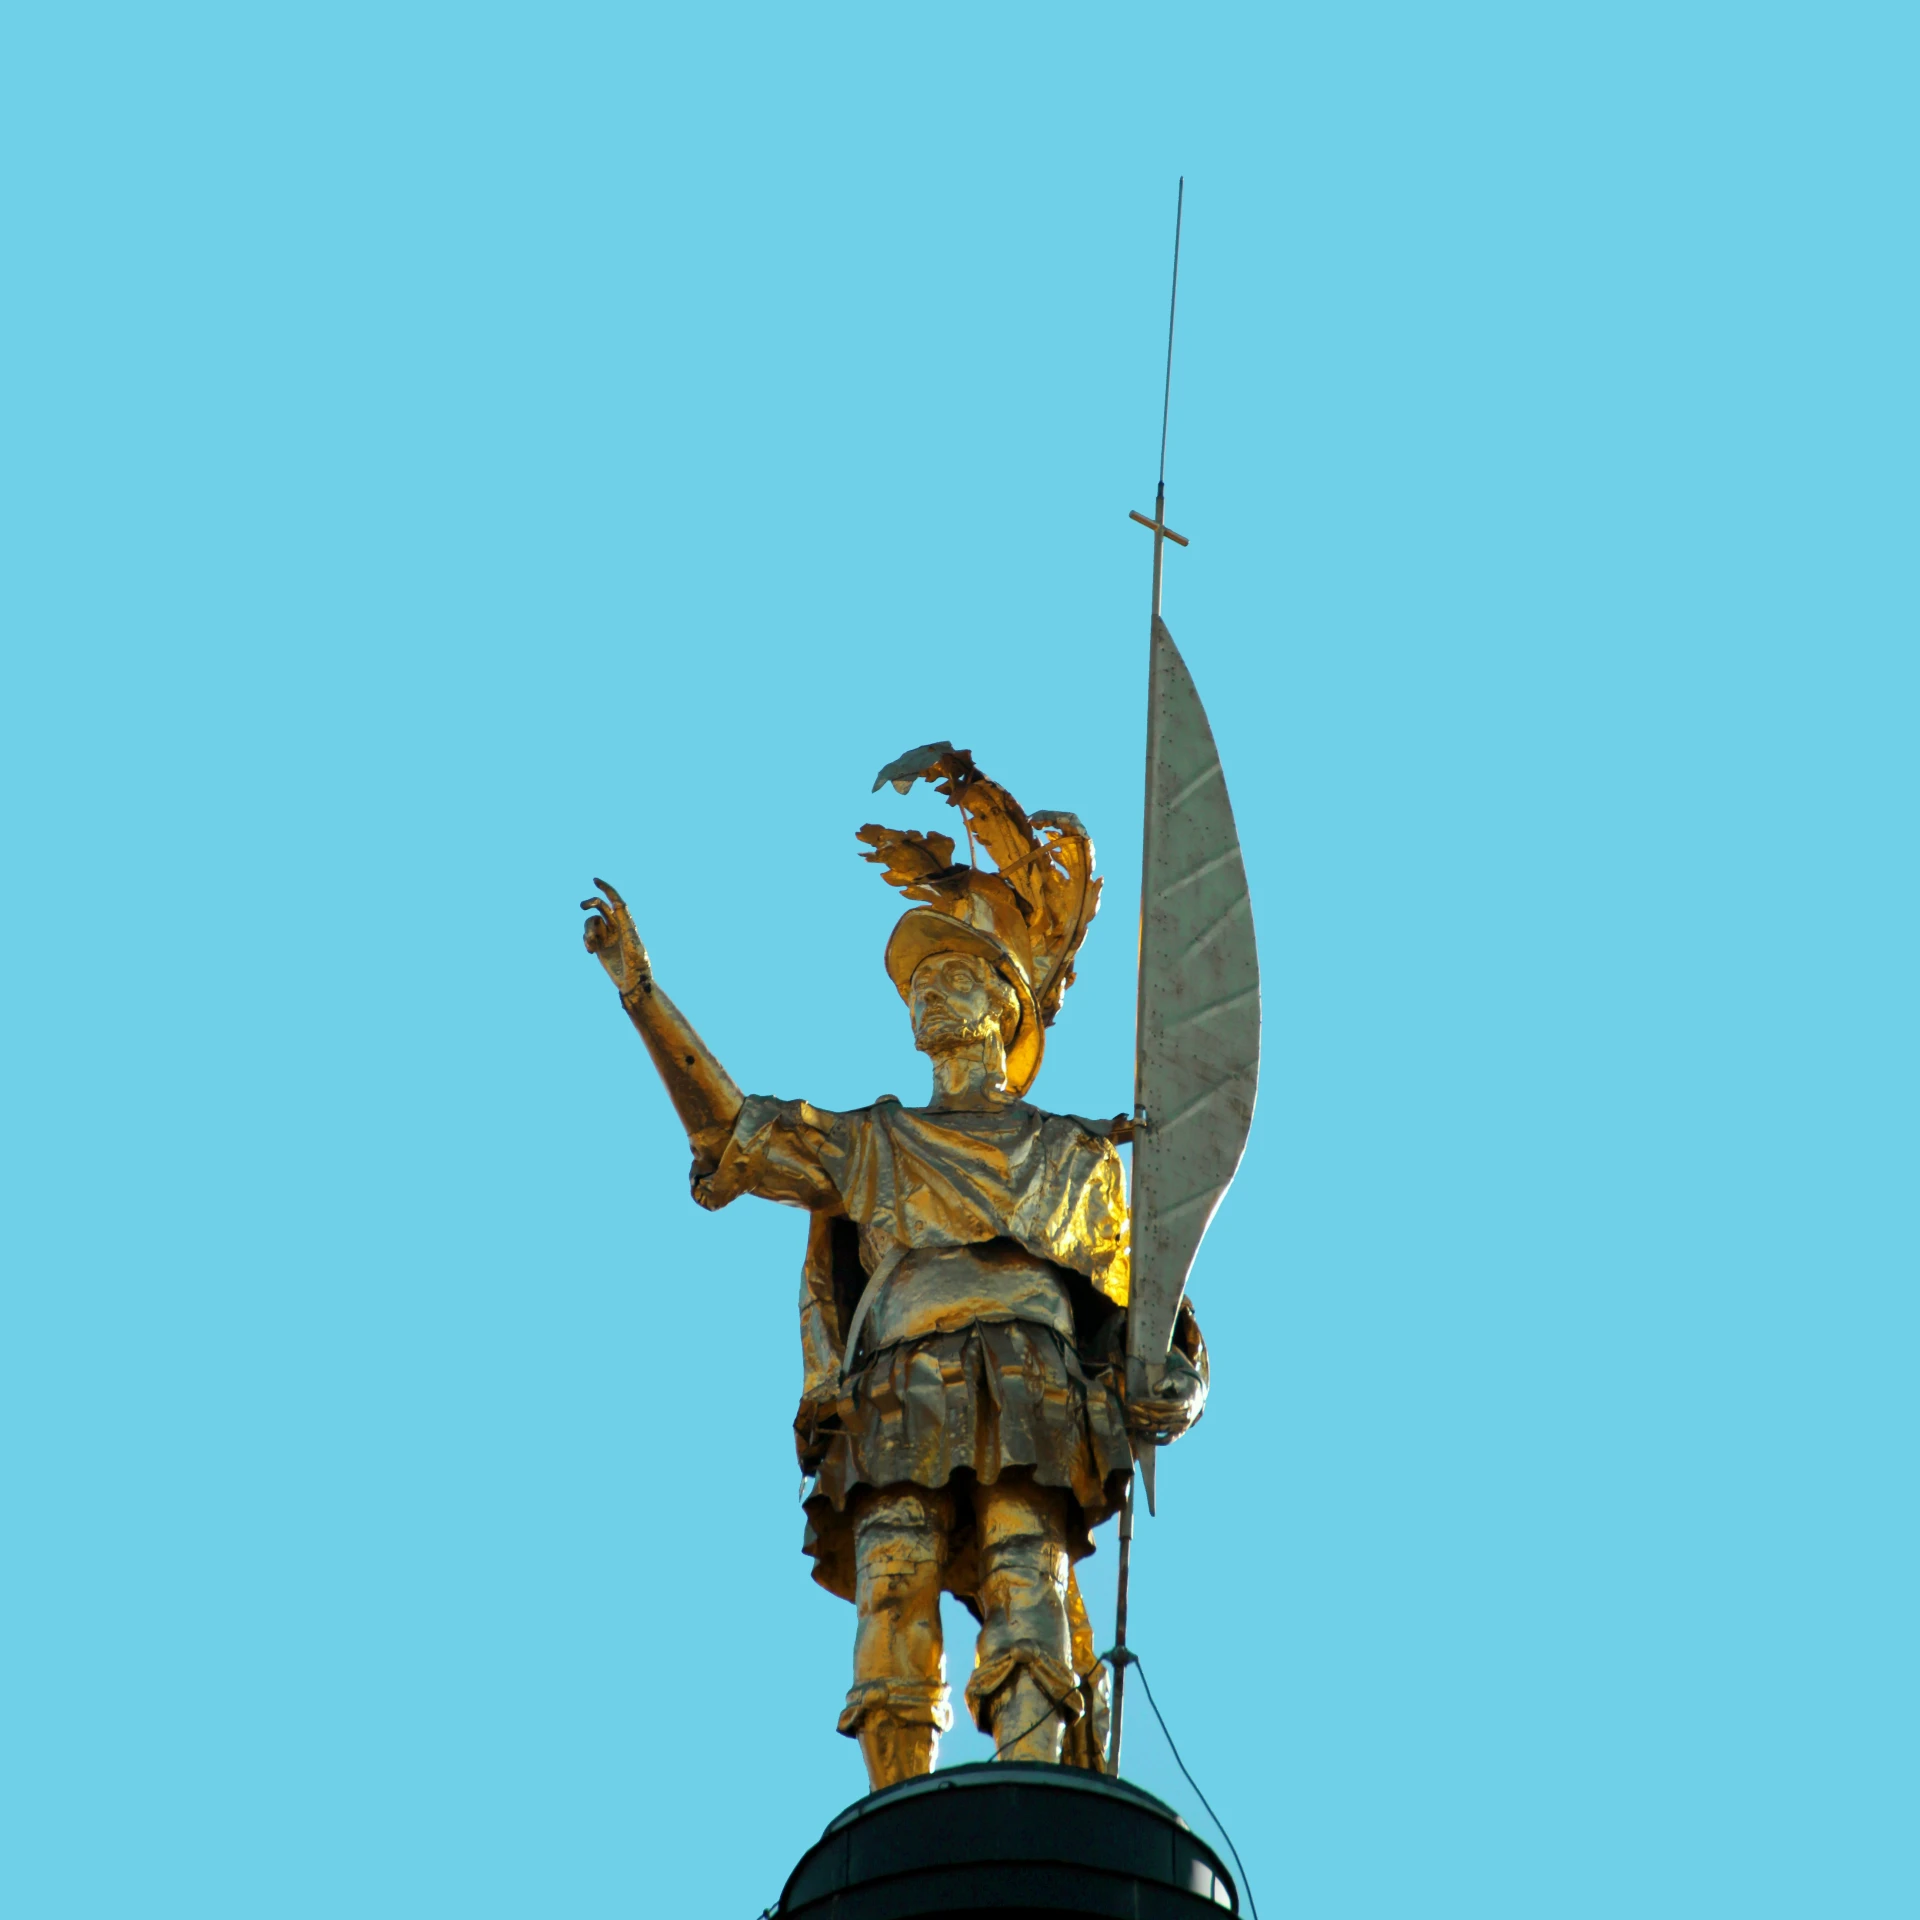 statue on top of a building with an antenna and flag